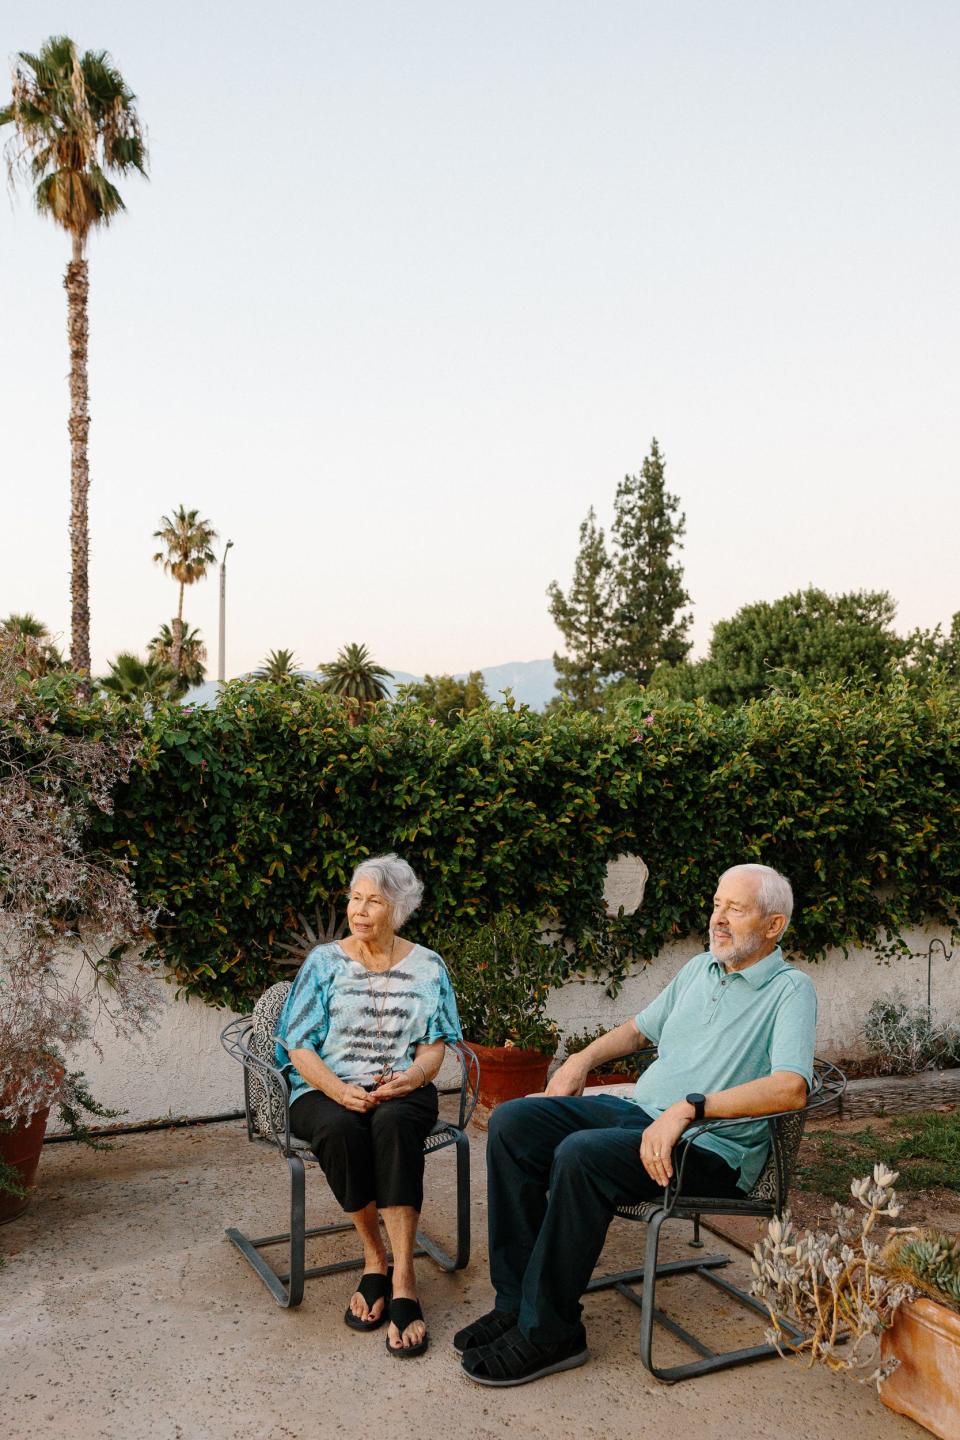 J Mailen Kootsey sitting with his wife, Lynne, outdoors with palm trees nearby.